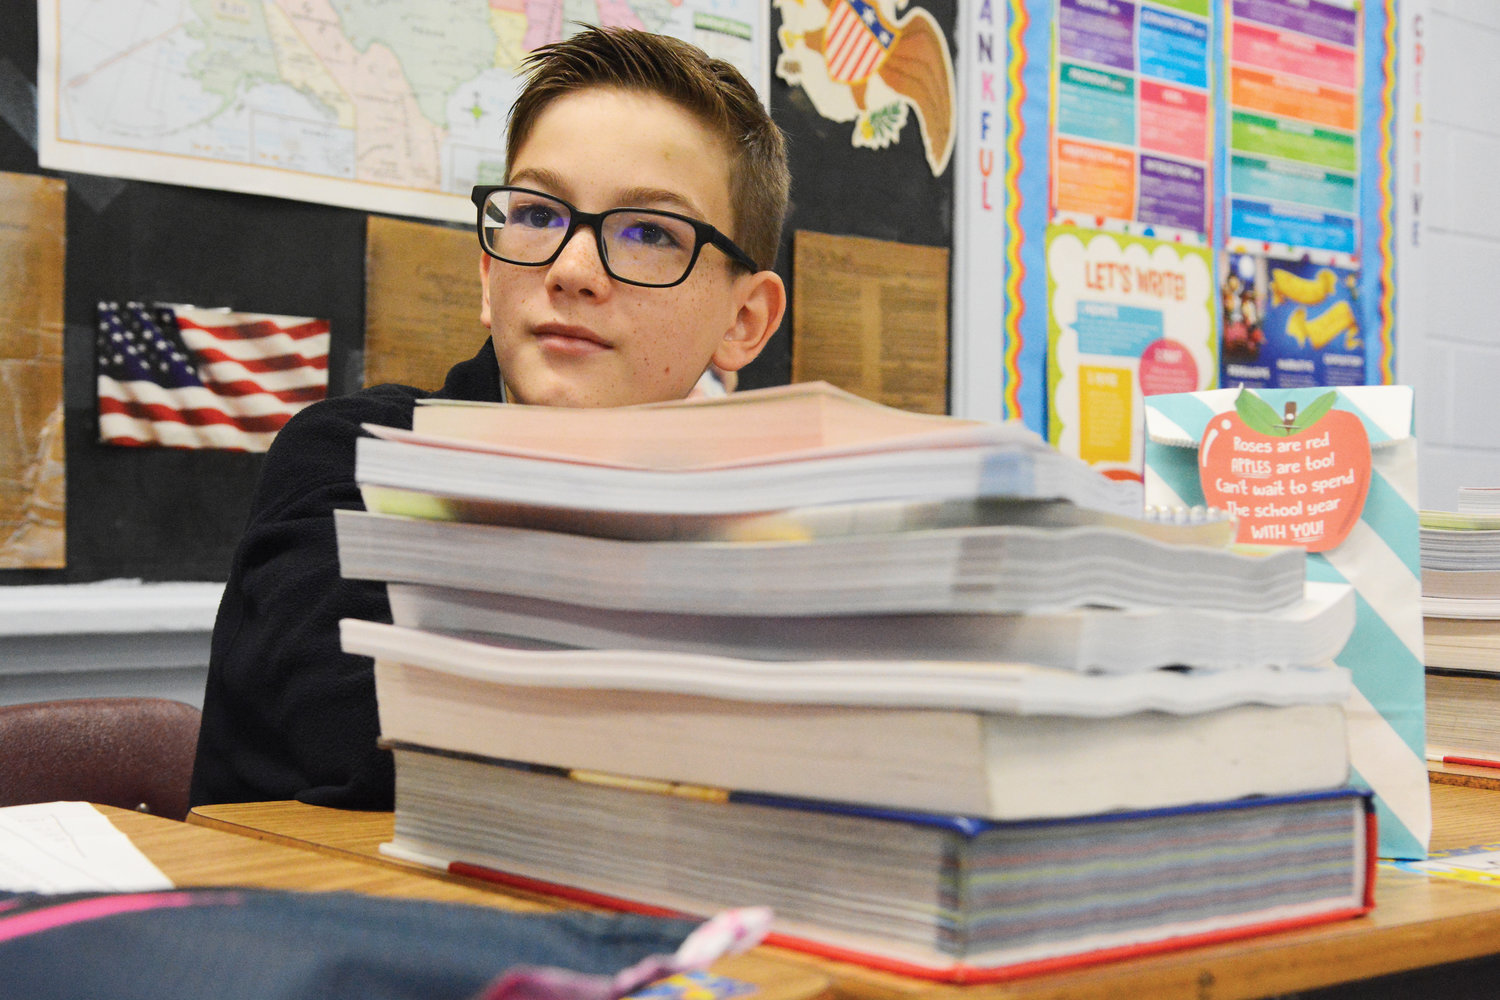 Students got right back to learning Sept. 6, the first day of classes at St. Mary’s School in Fishkill. The books were piled high in front of seventh-grader Logan Claire.